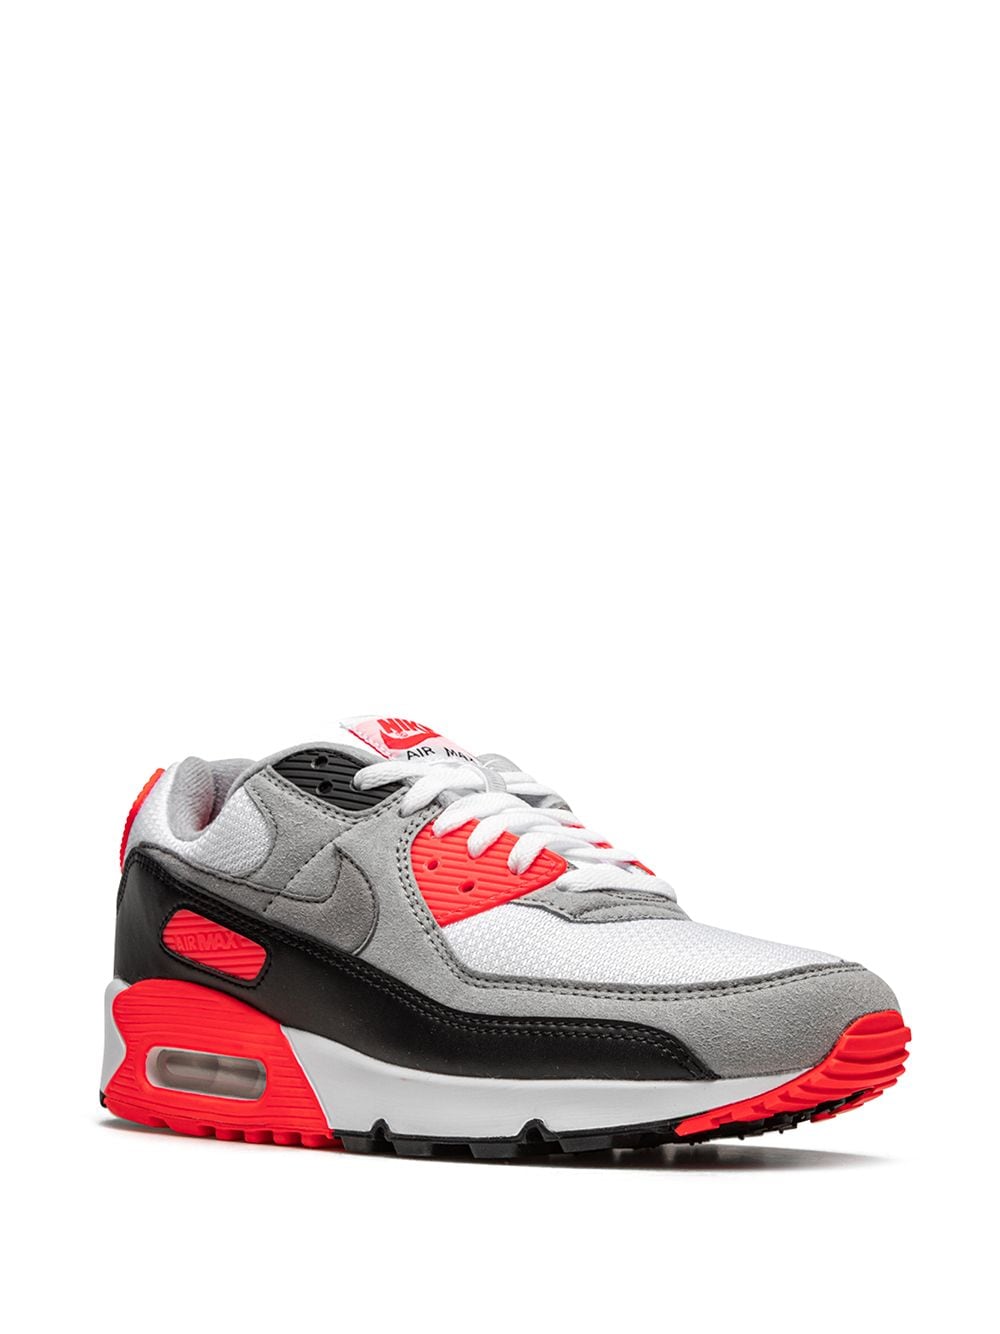 Nike Air OG "Infrared 2020" Sneakers - Farfetch